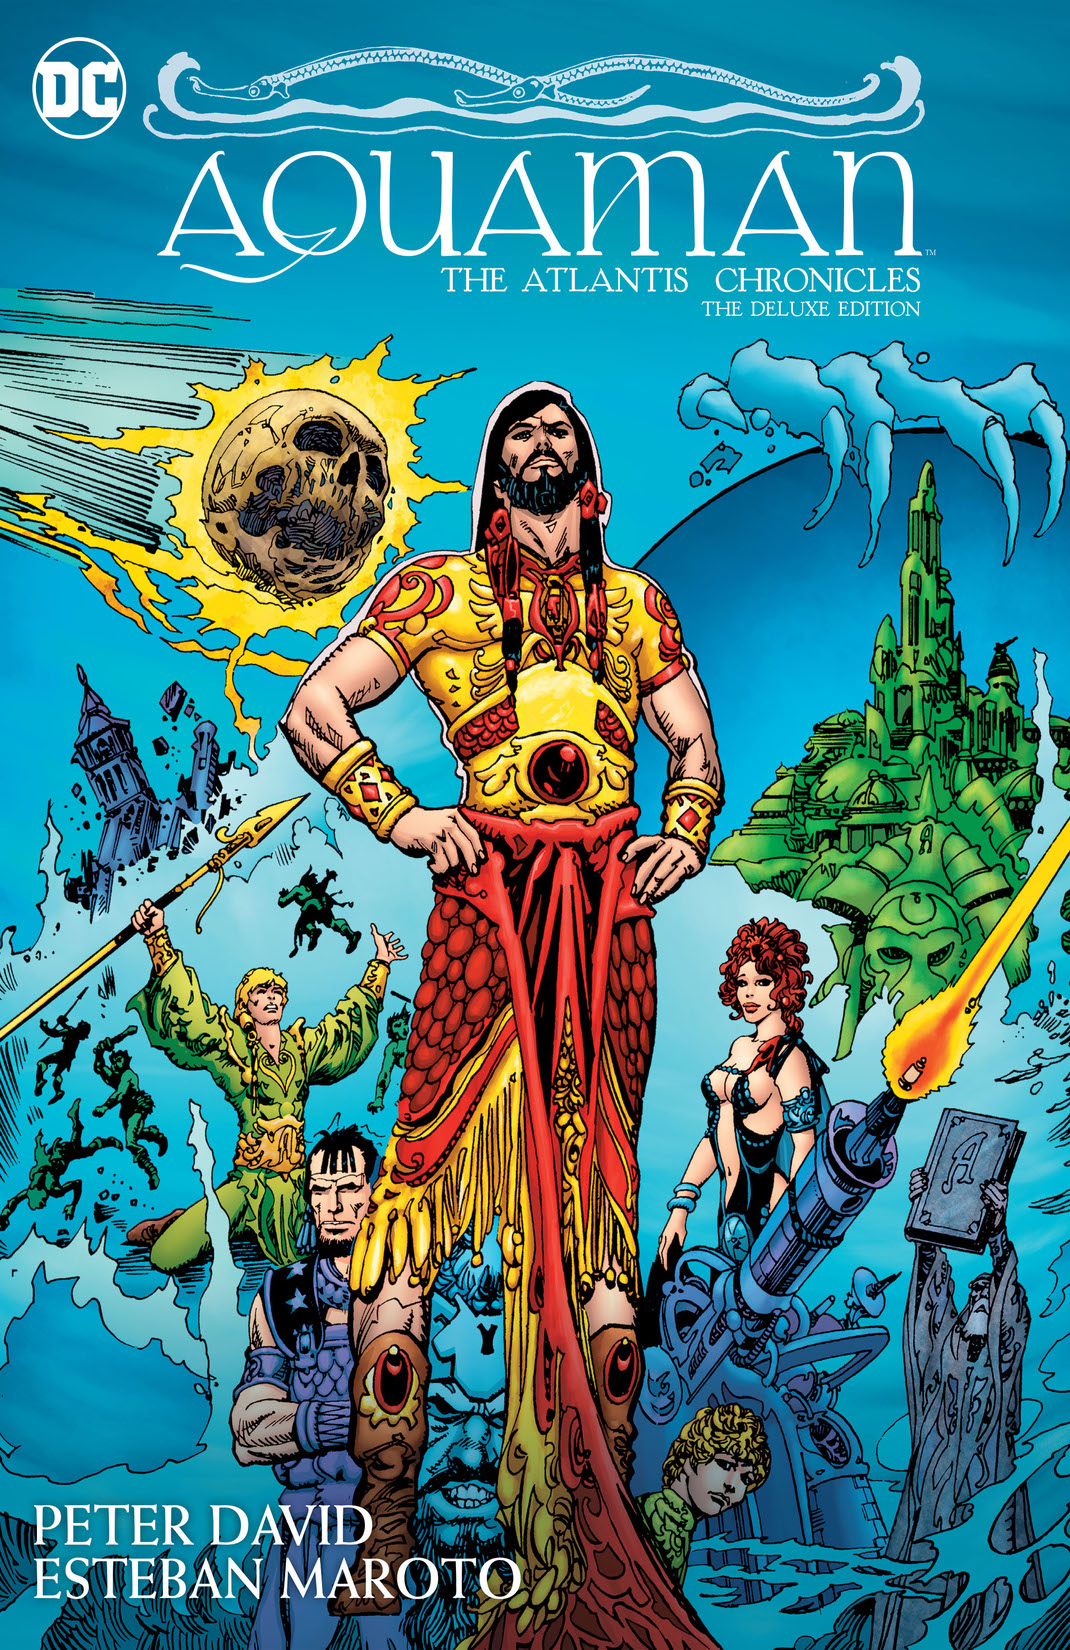 Aquaman: The Atlantis Chronicles Deluxe Edition preview images